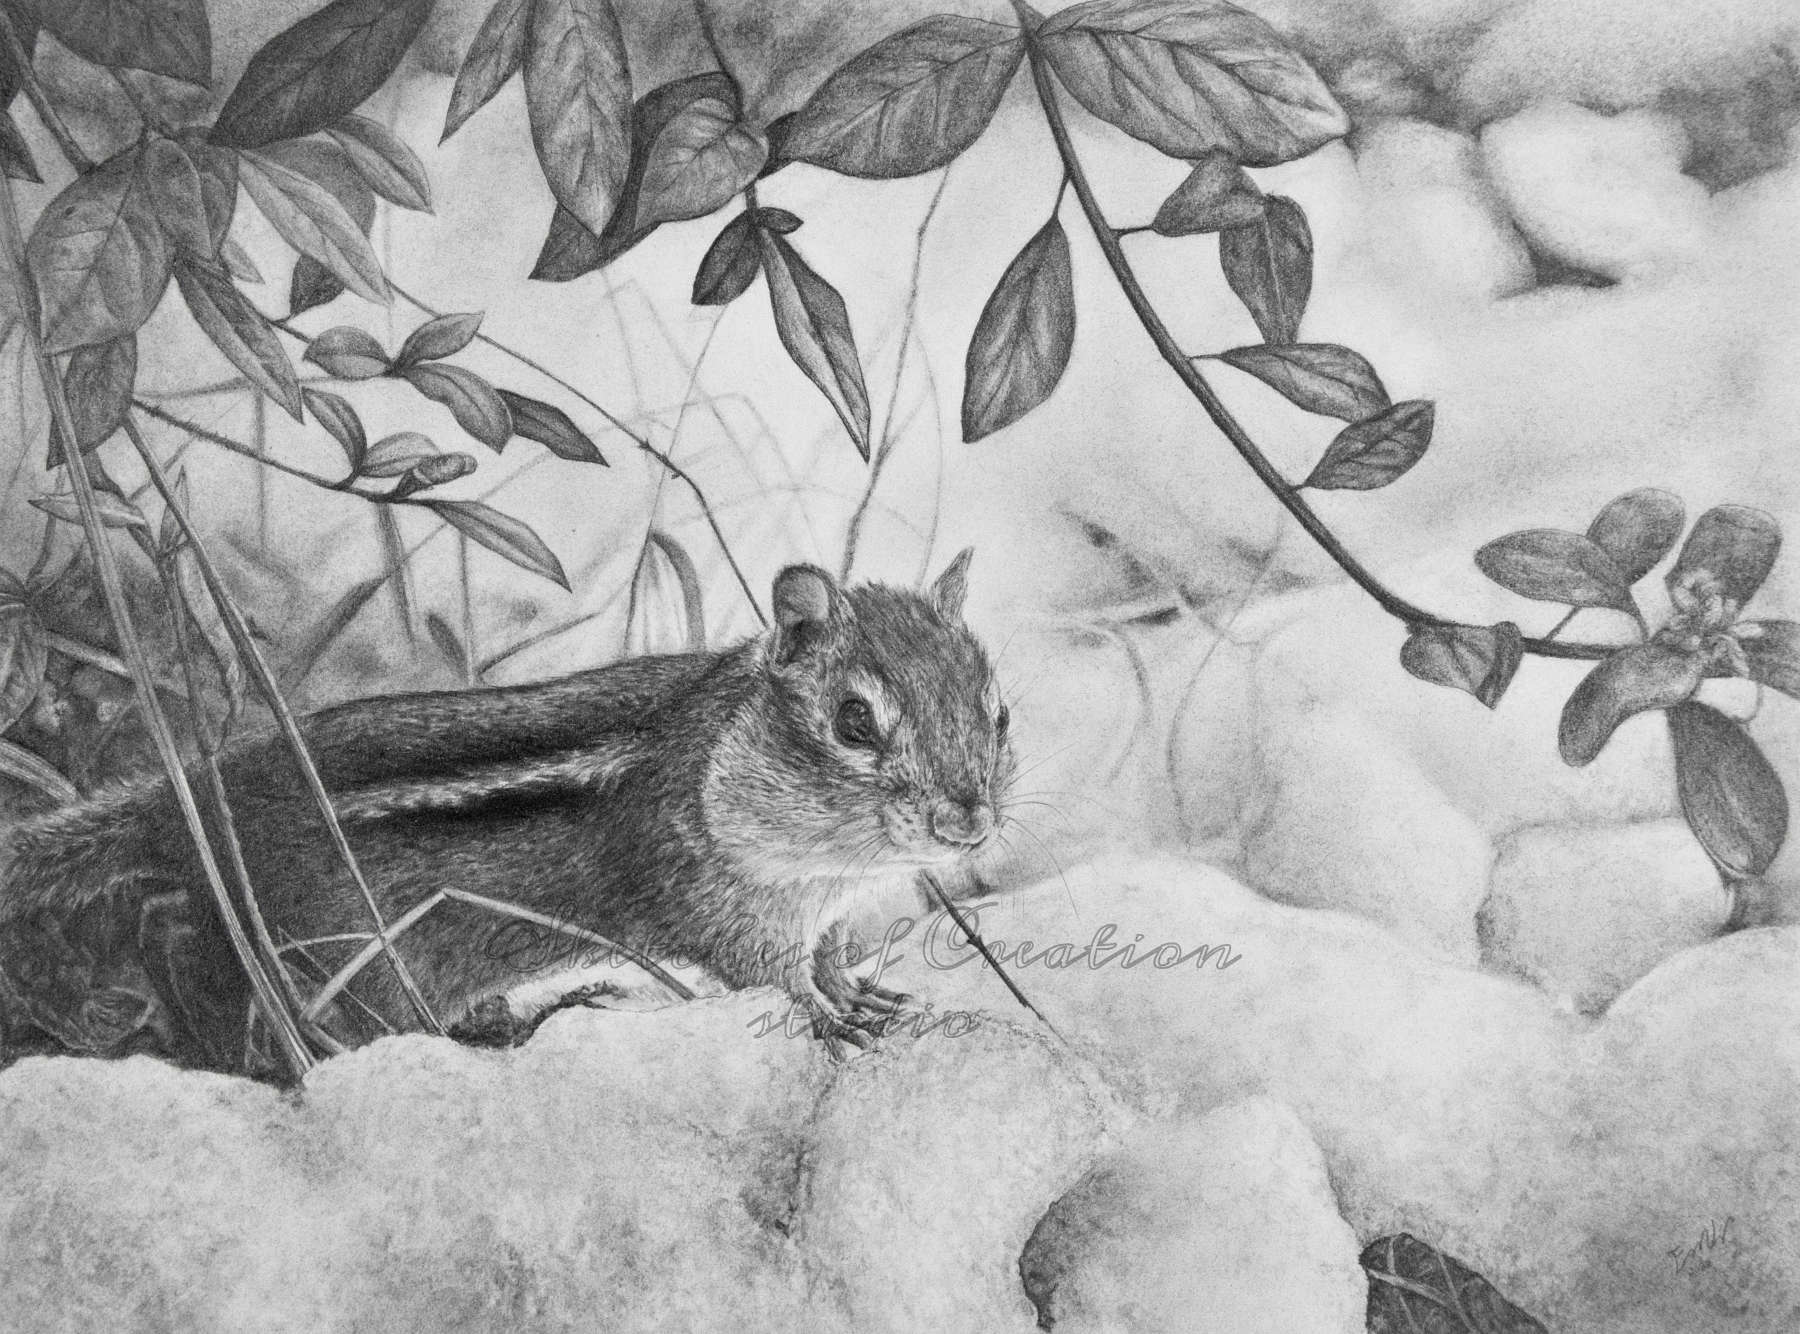 'Into the Snow' a drawing of a Chipmunk looking out from under a bush in the snow. 9x12 inches. Completed August 2020